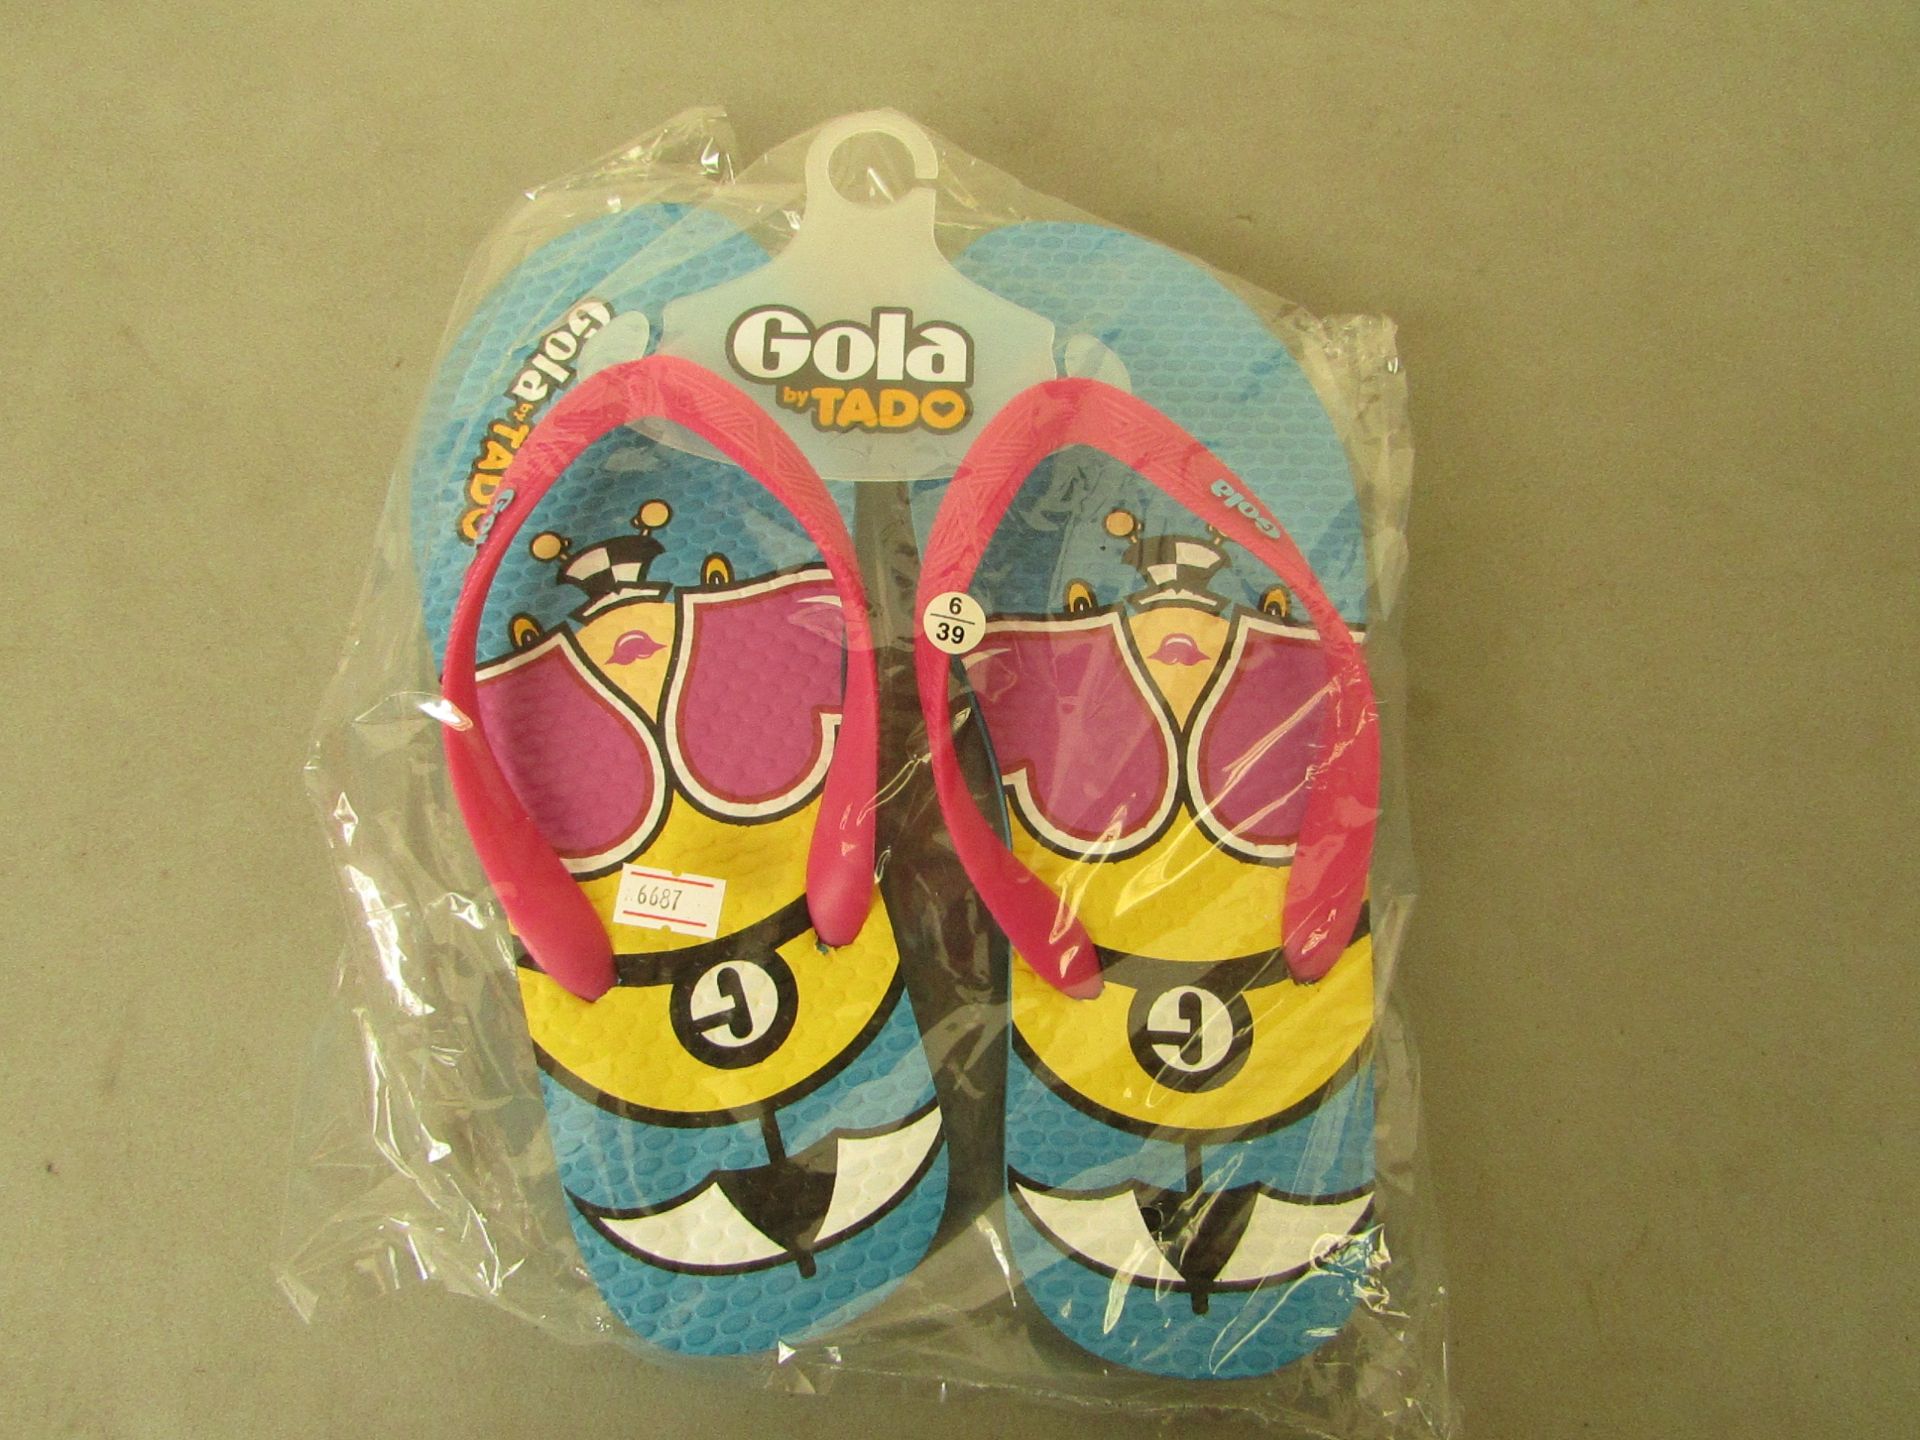 3 X Pairs Gola By Tado Flip Flops all size 6 all new in packaging